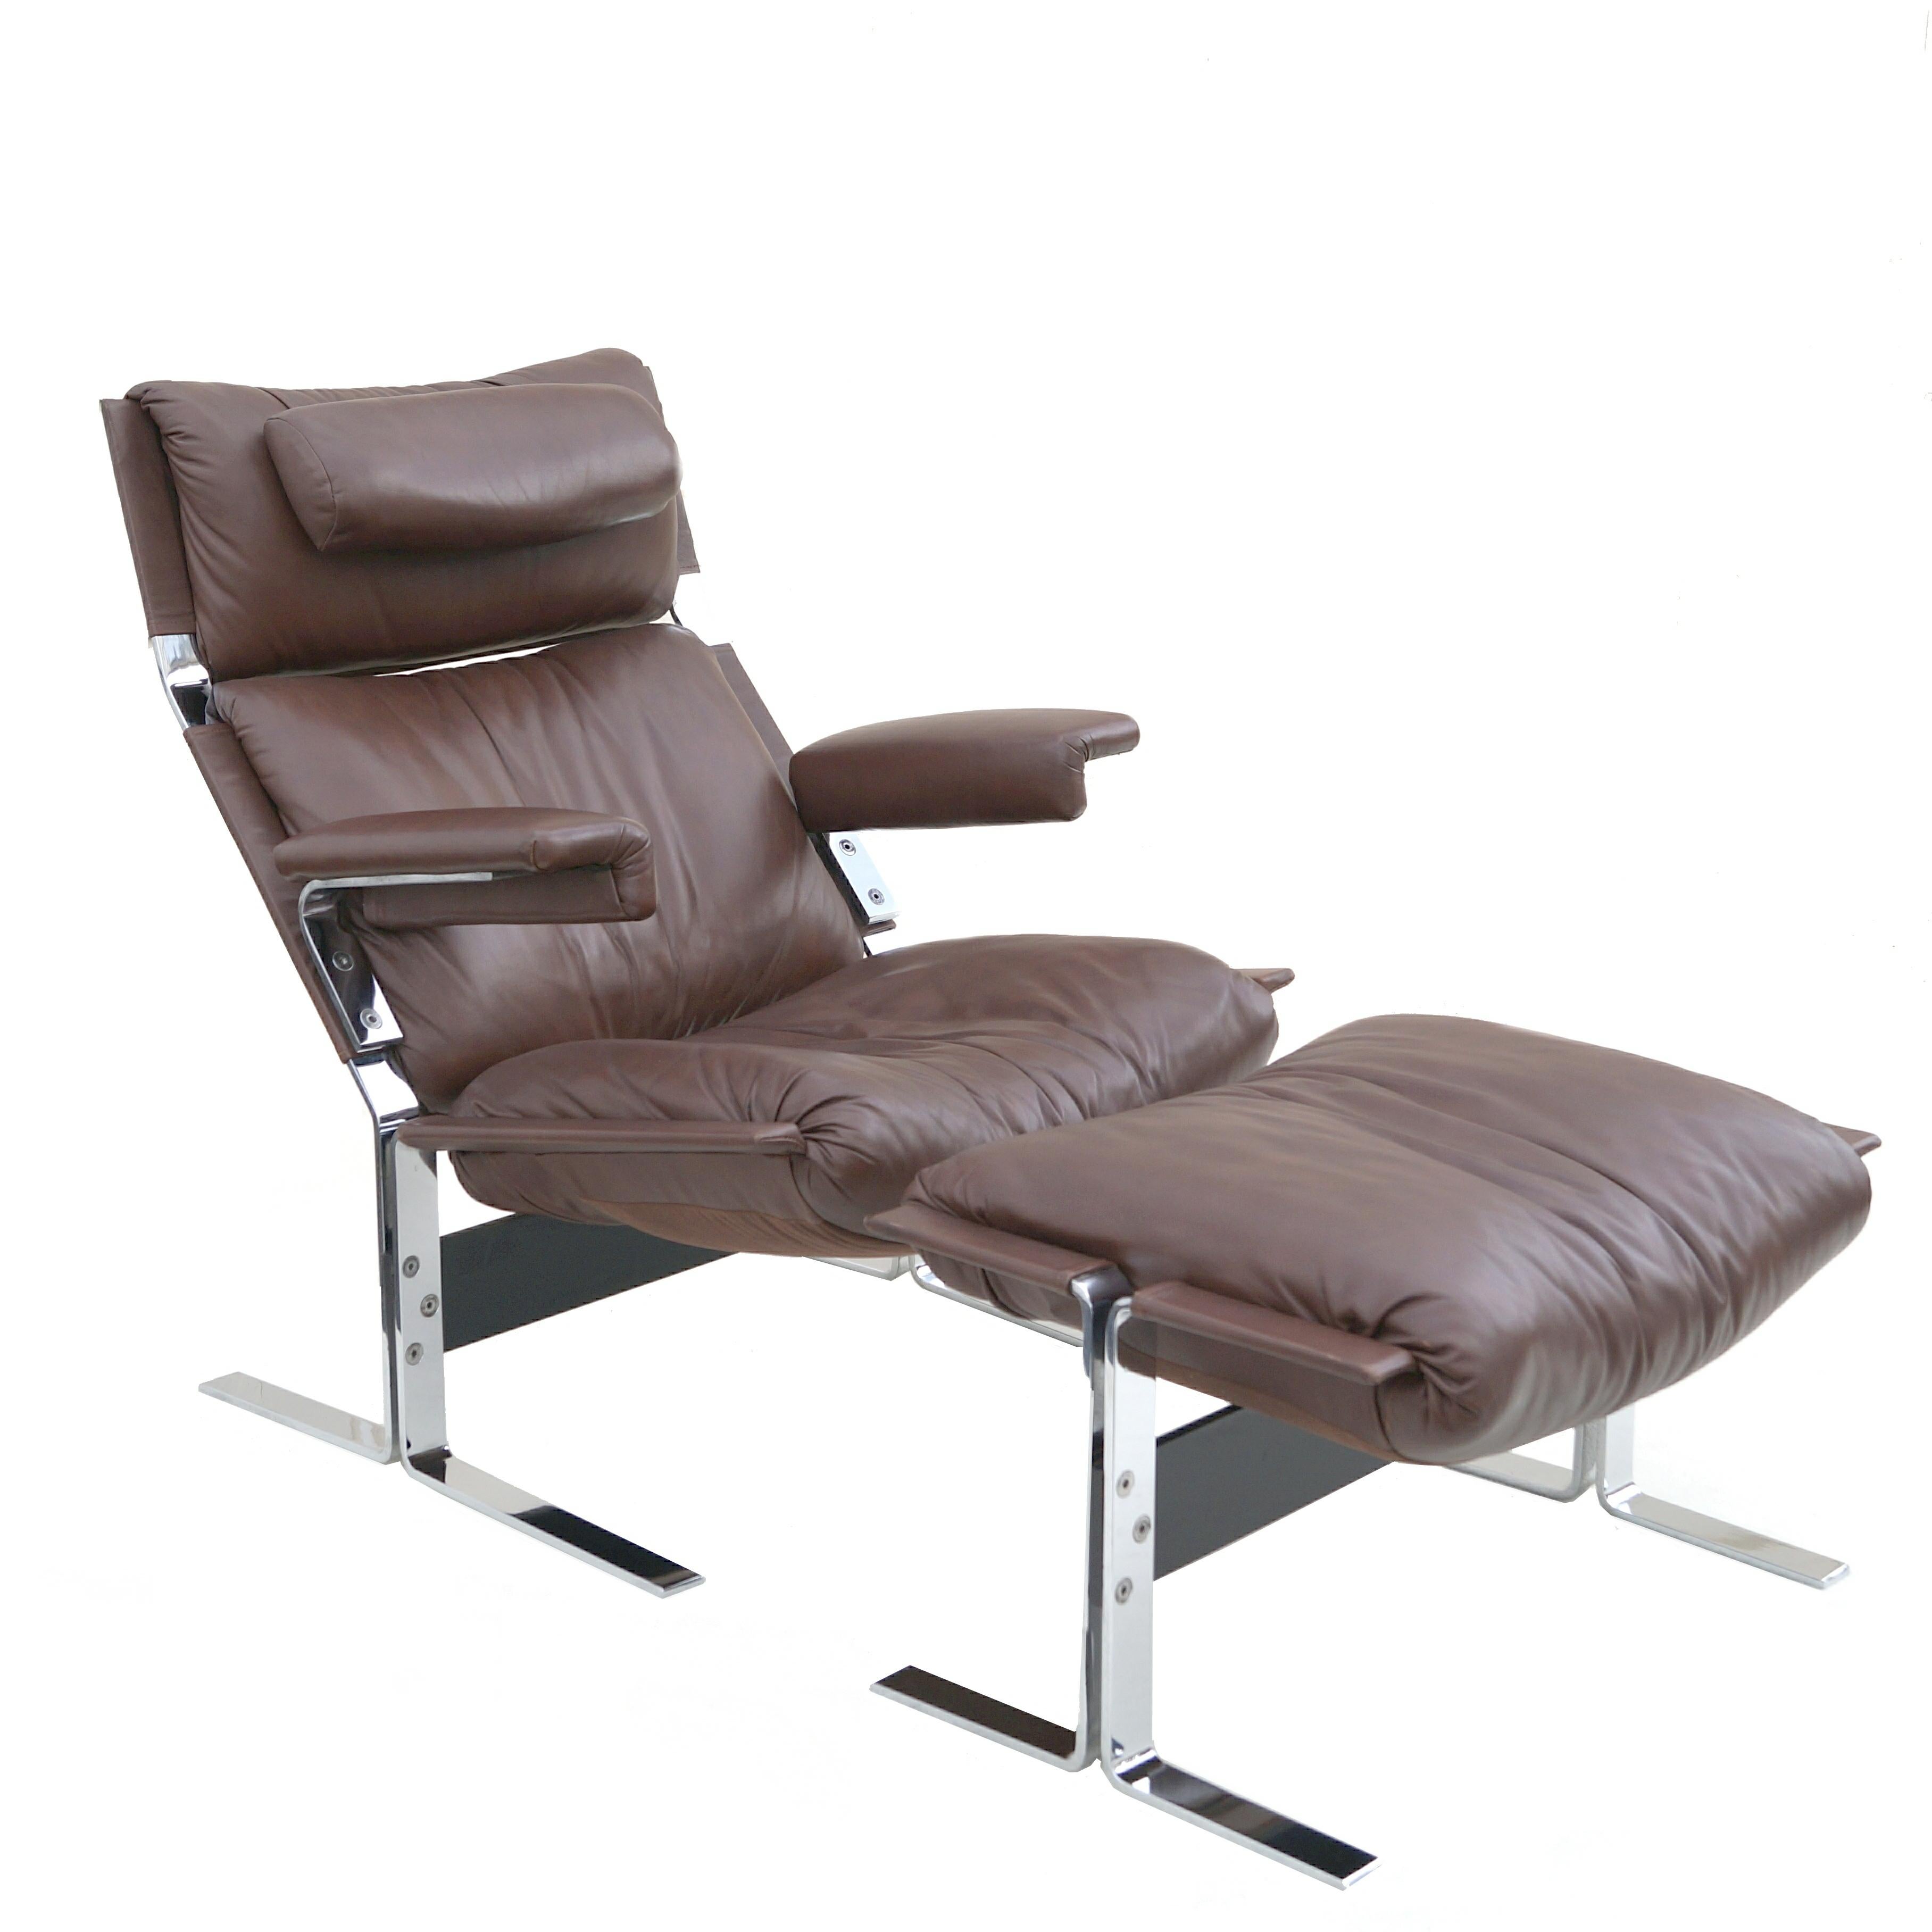 Brown leather and polished chrome, lounge chair and ottoman, by Richard Hersberger for Pace. In good condition. The dimensions of the ottoman are 26